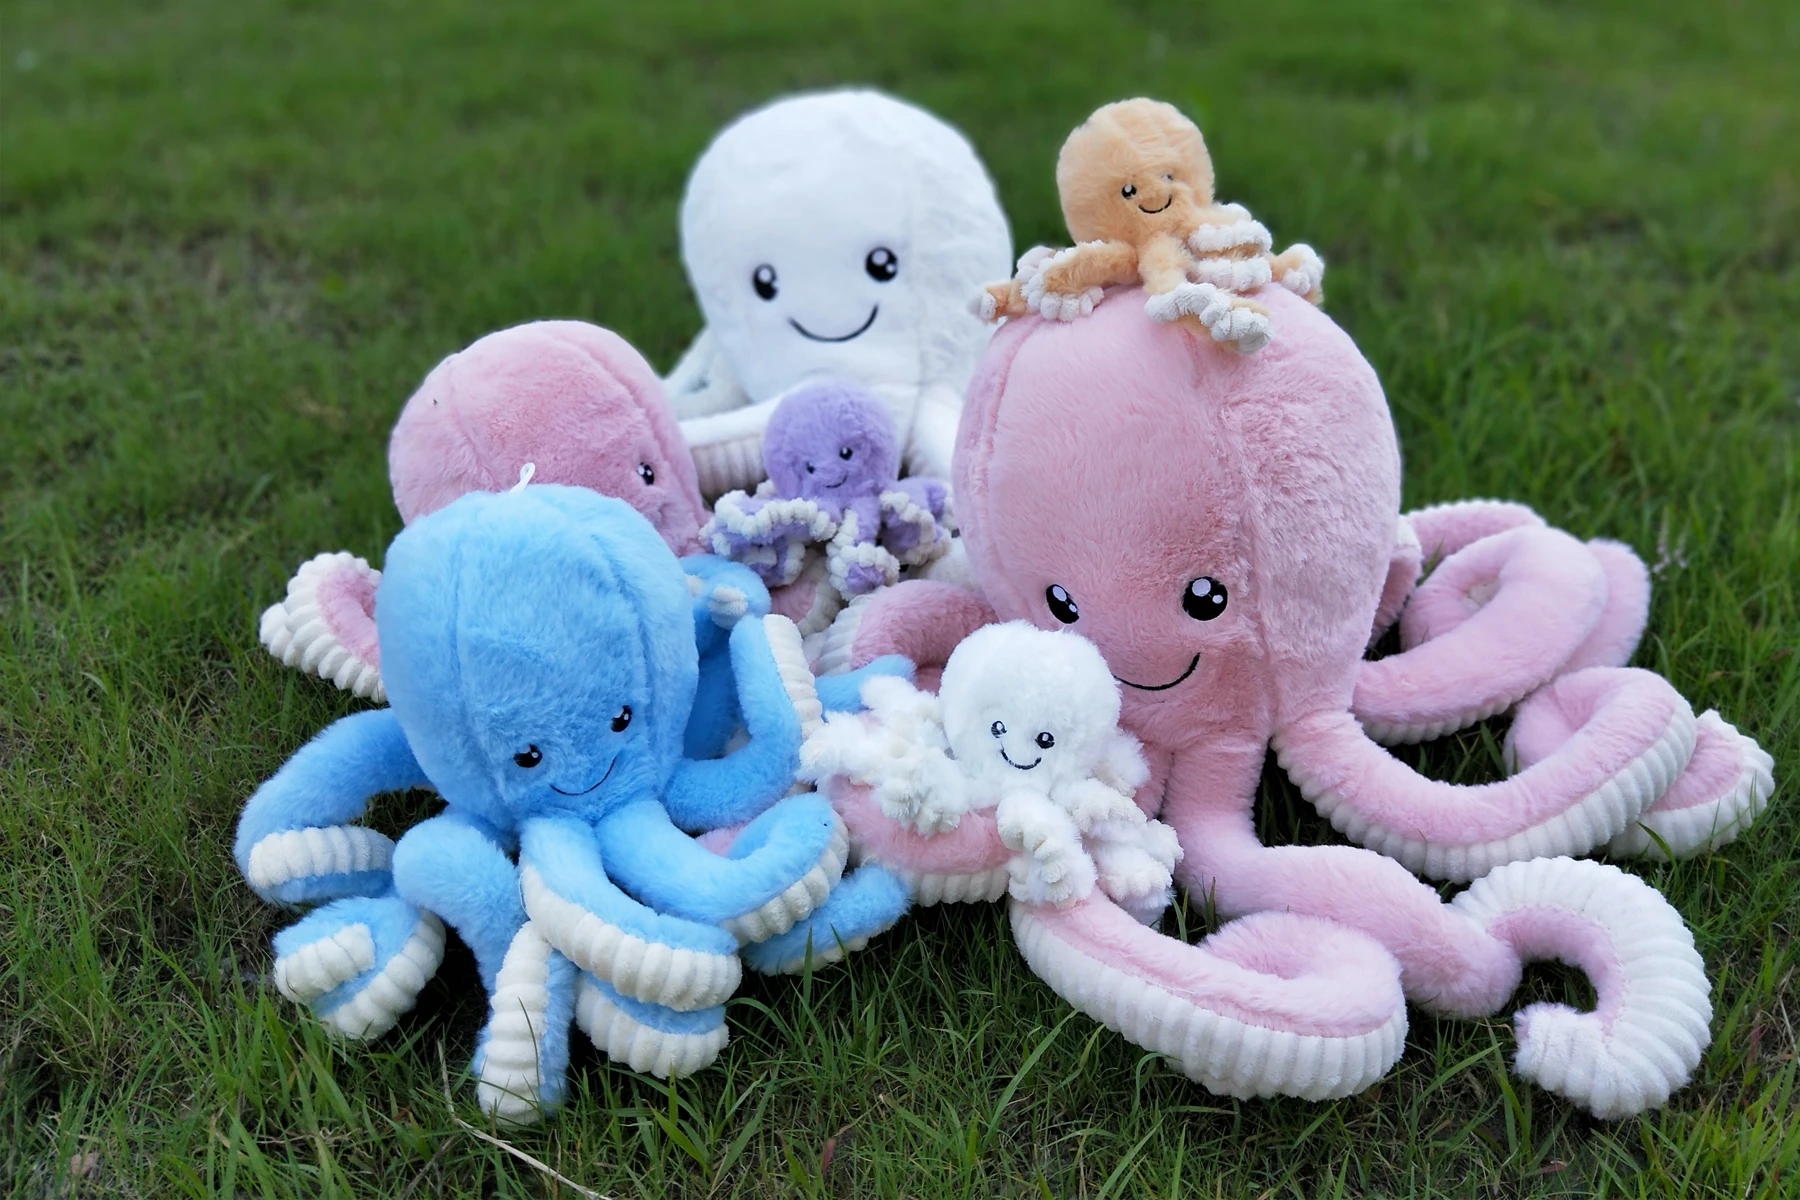 18cm-80cmLovely Simulation octopus Pendant Plush Stuffed Toy Soft Animal Home Accessories Cute Animal Doll Children Gifts